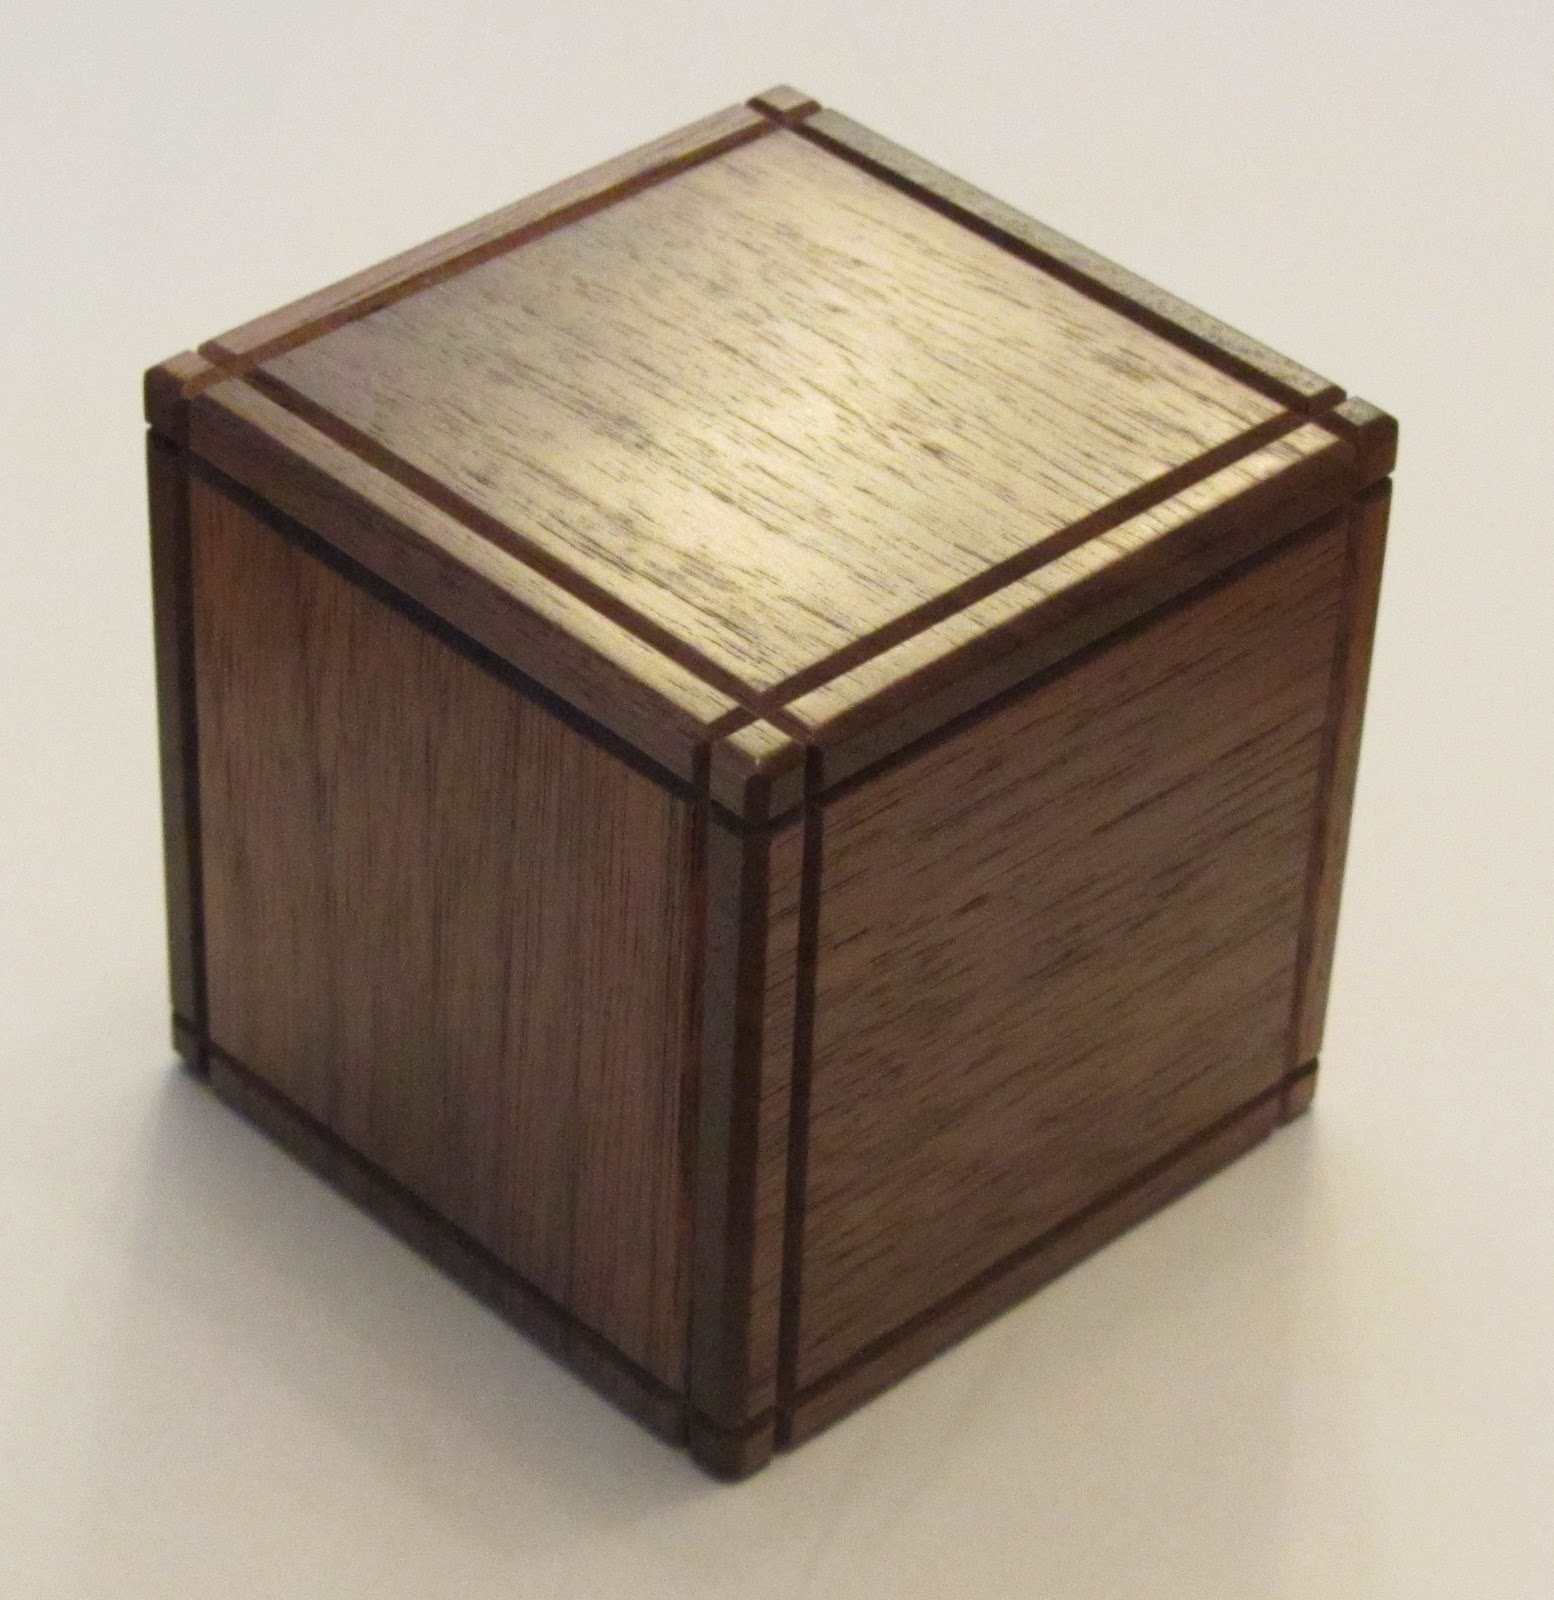 Chinese Puzzle Box Puzzle boxes for quite a